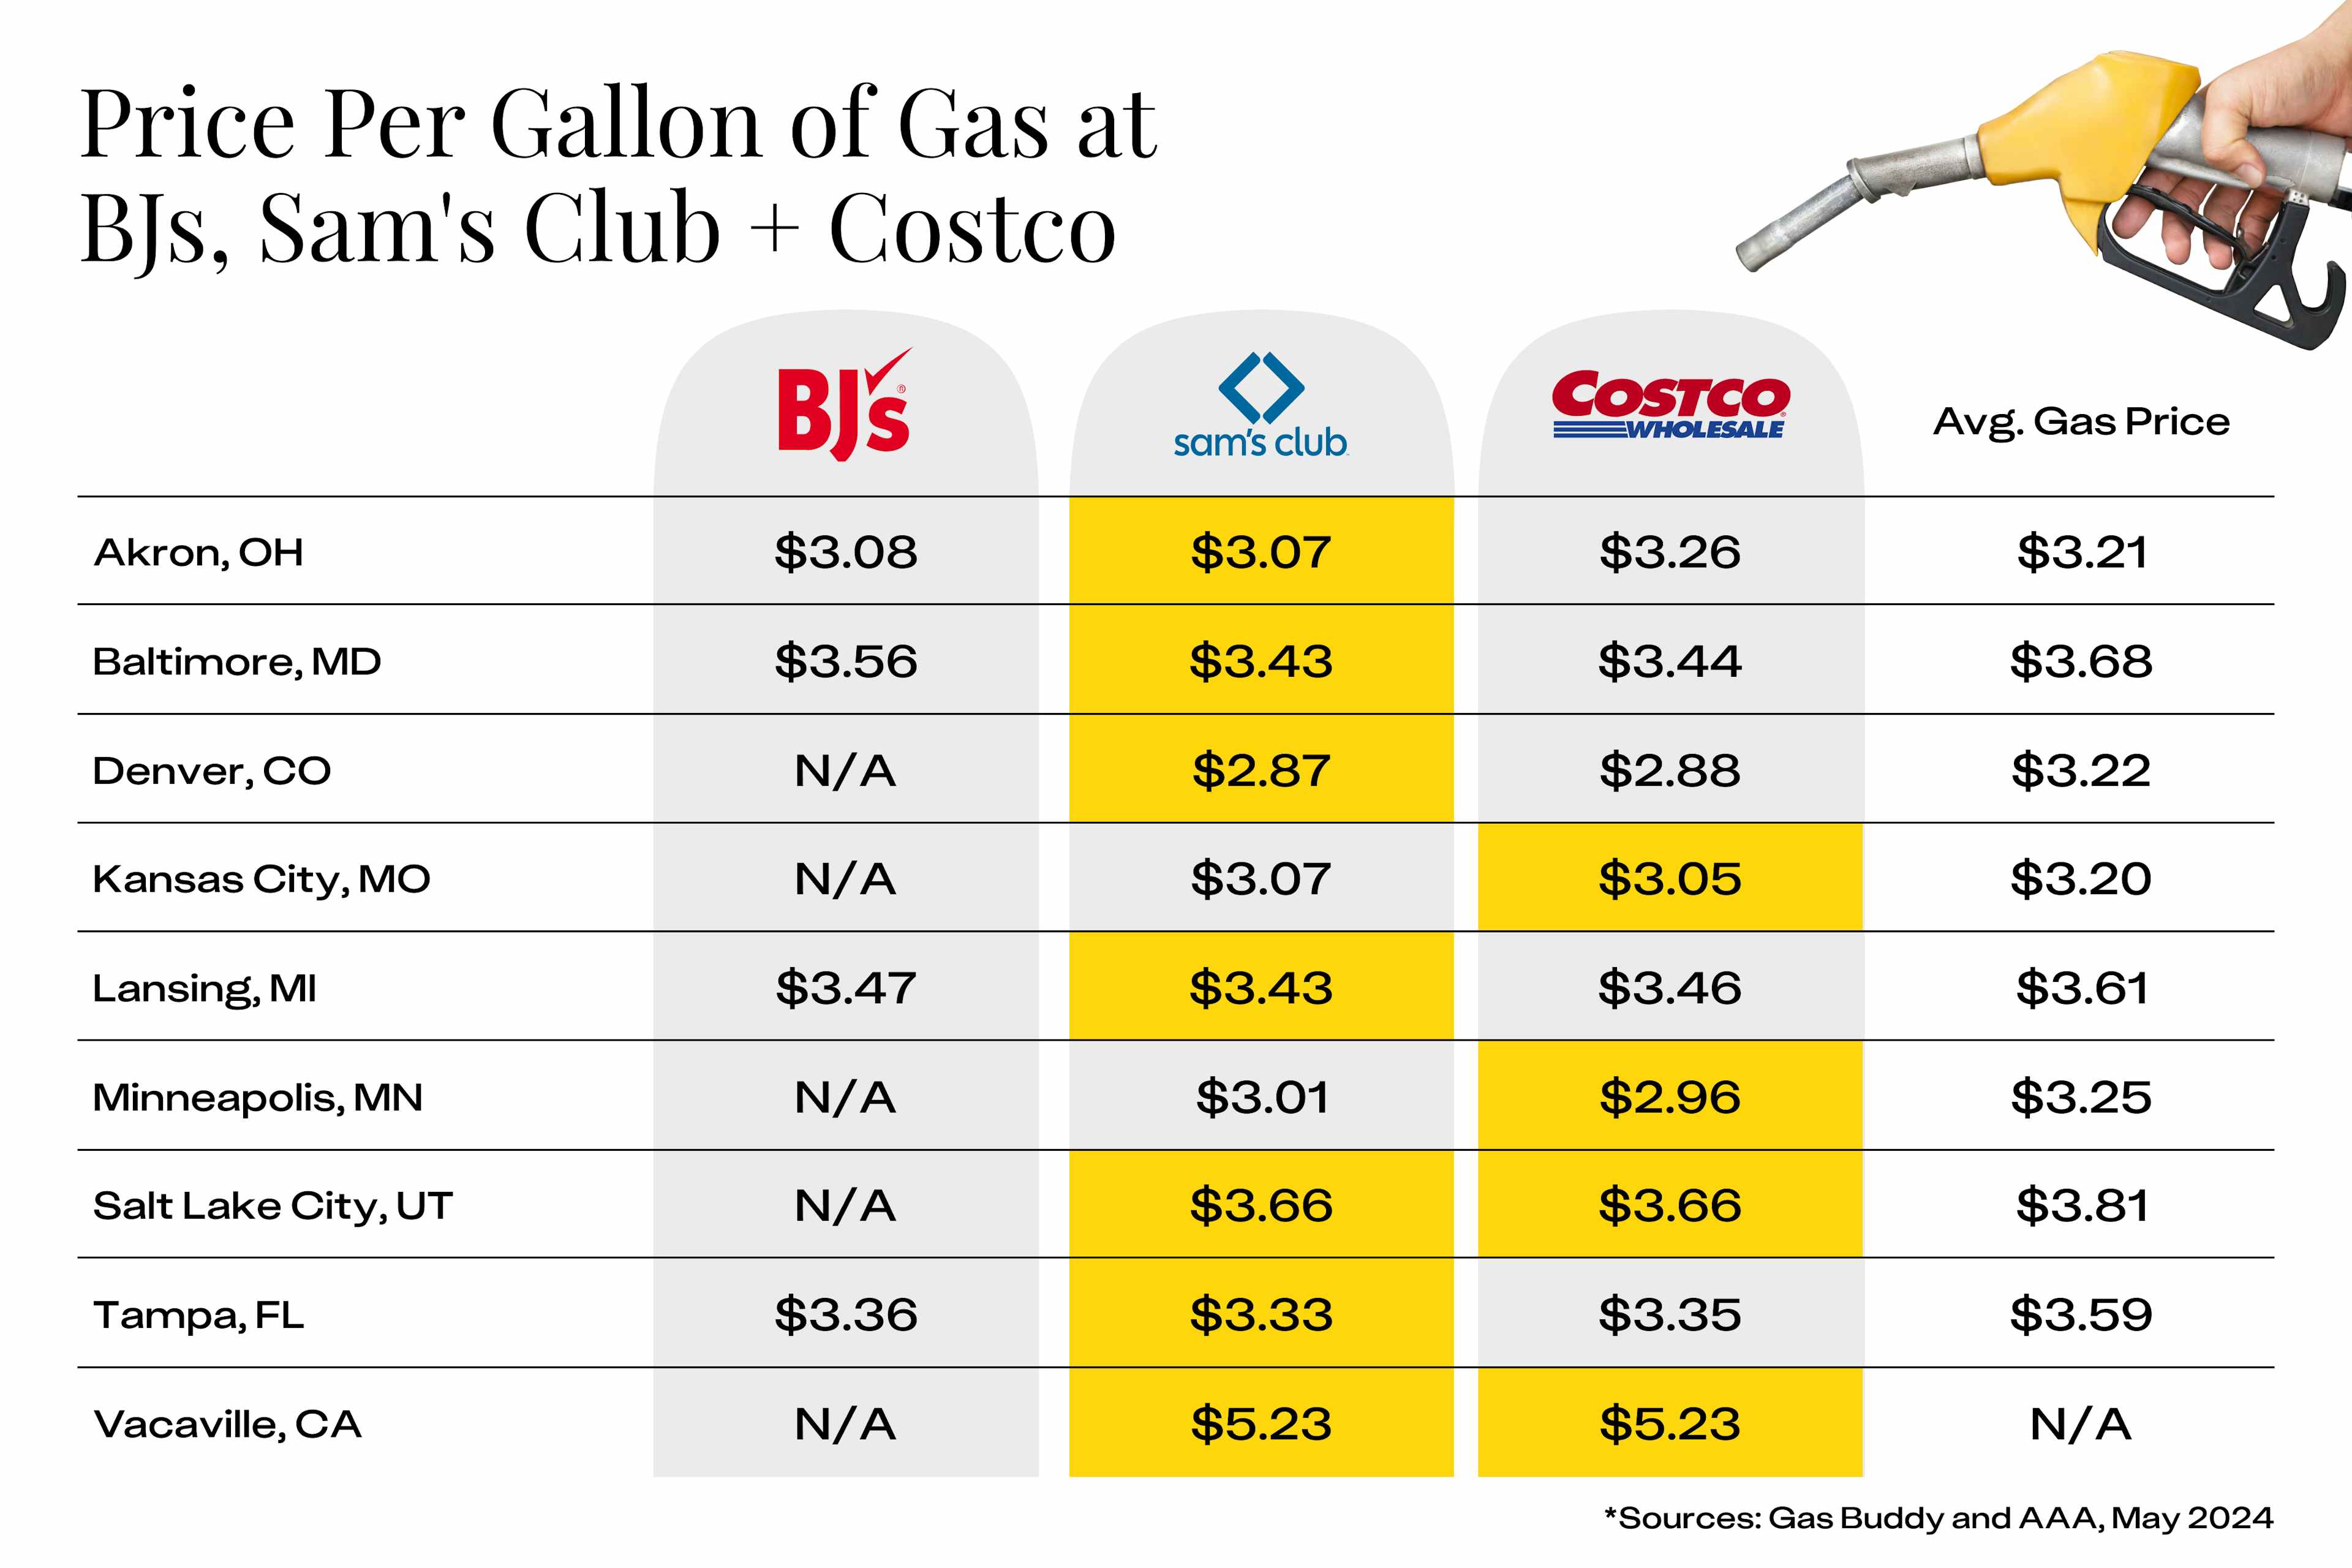 Average gas prices for Sam's Club, Costco, and BJ's compared in nine U.S. cities.